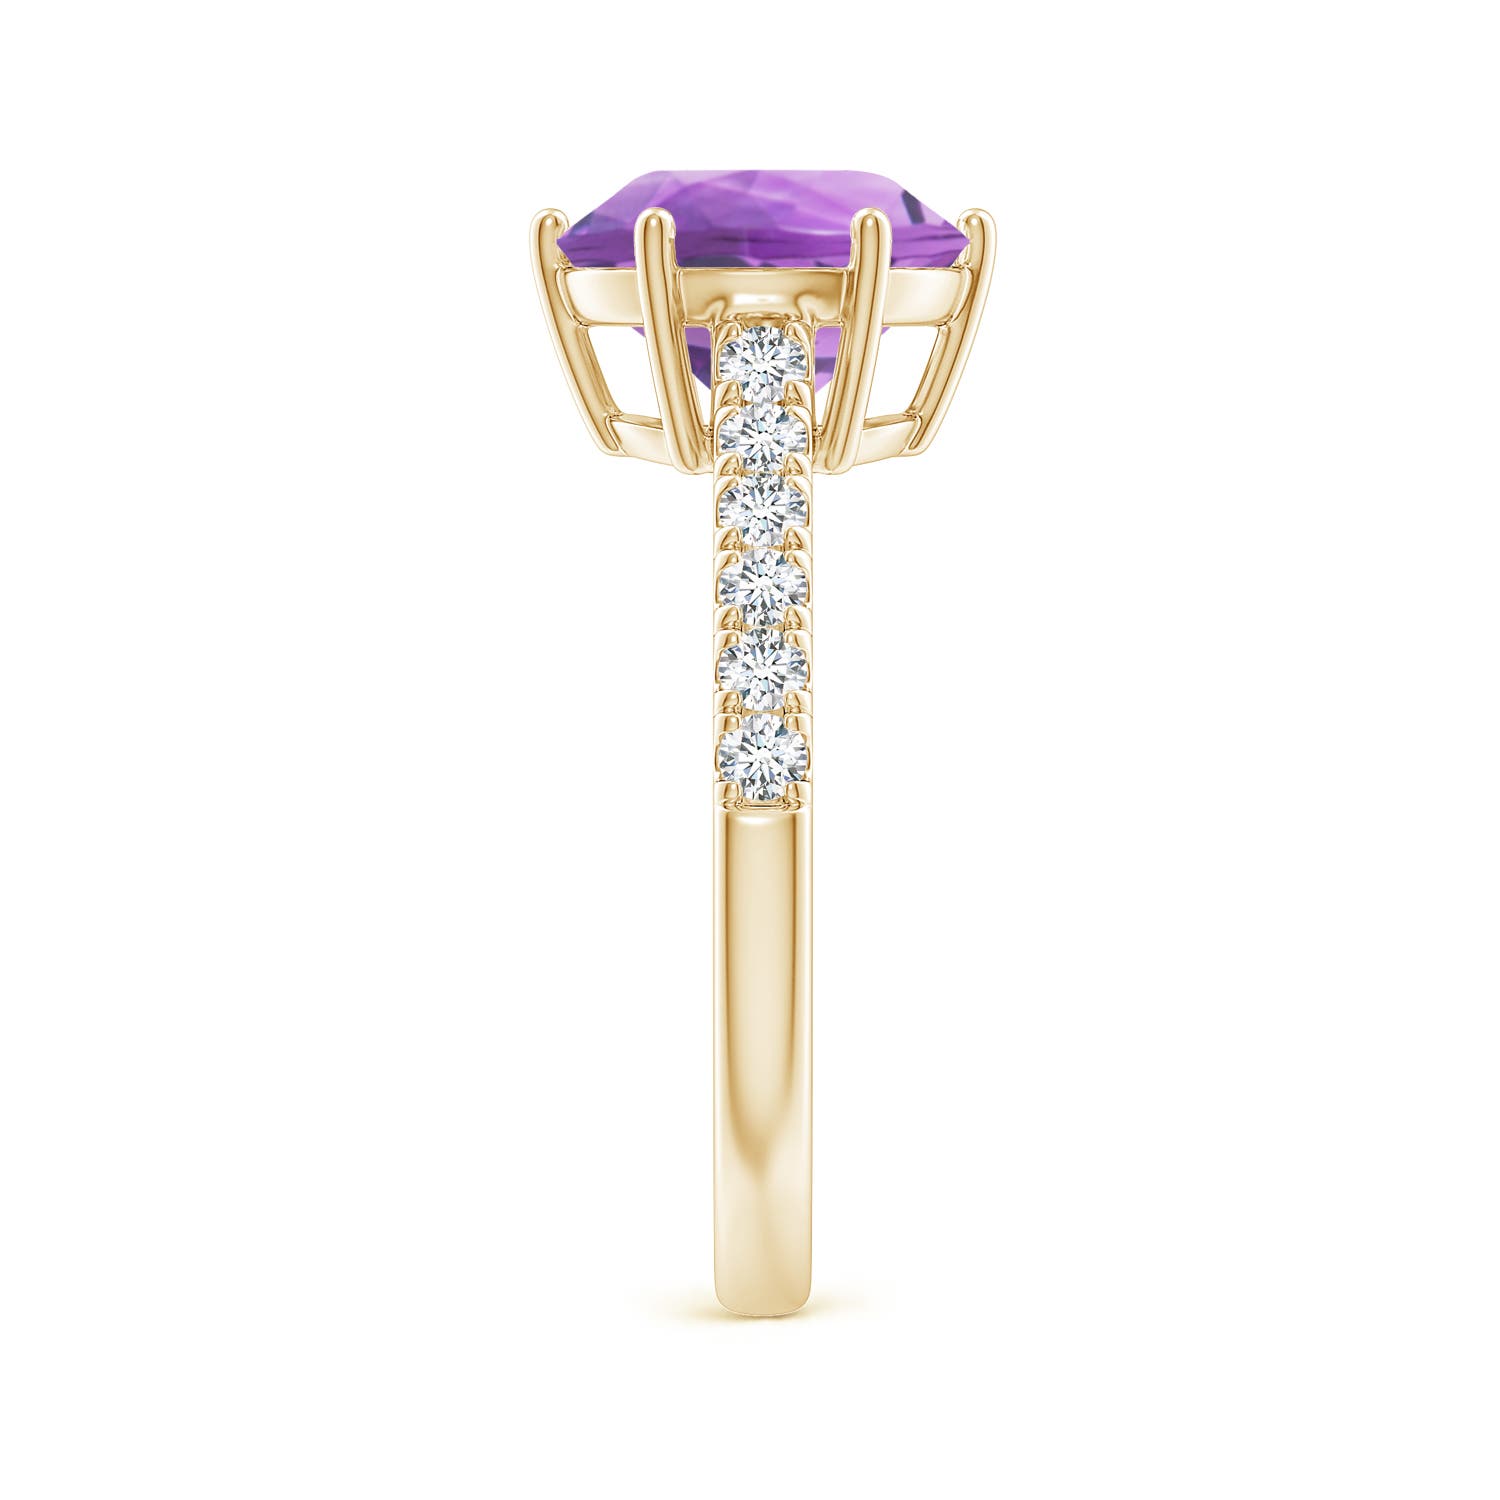 A - Amethyst / 2.75 CT / 14 KT Yellow Gold